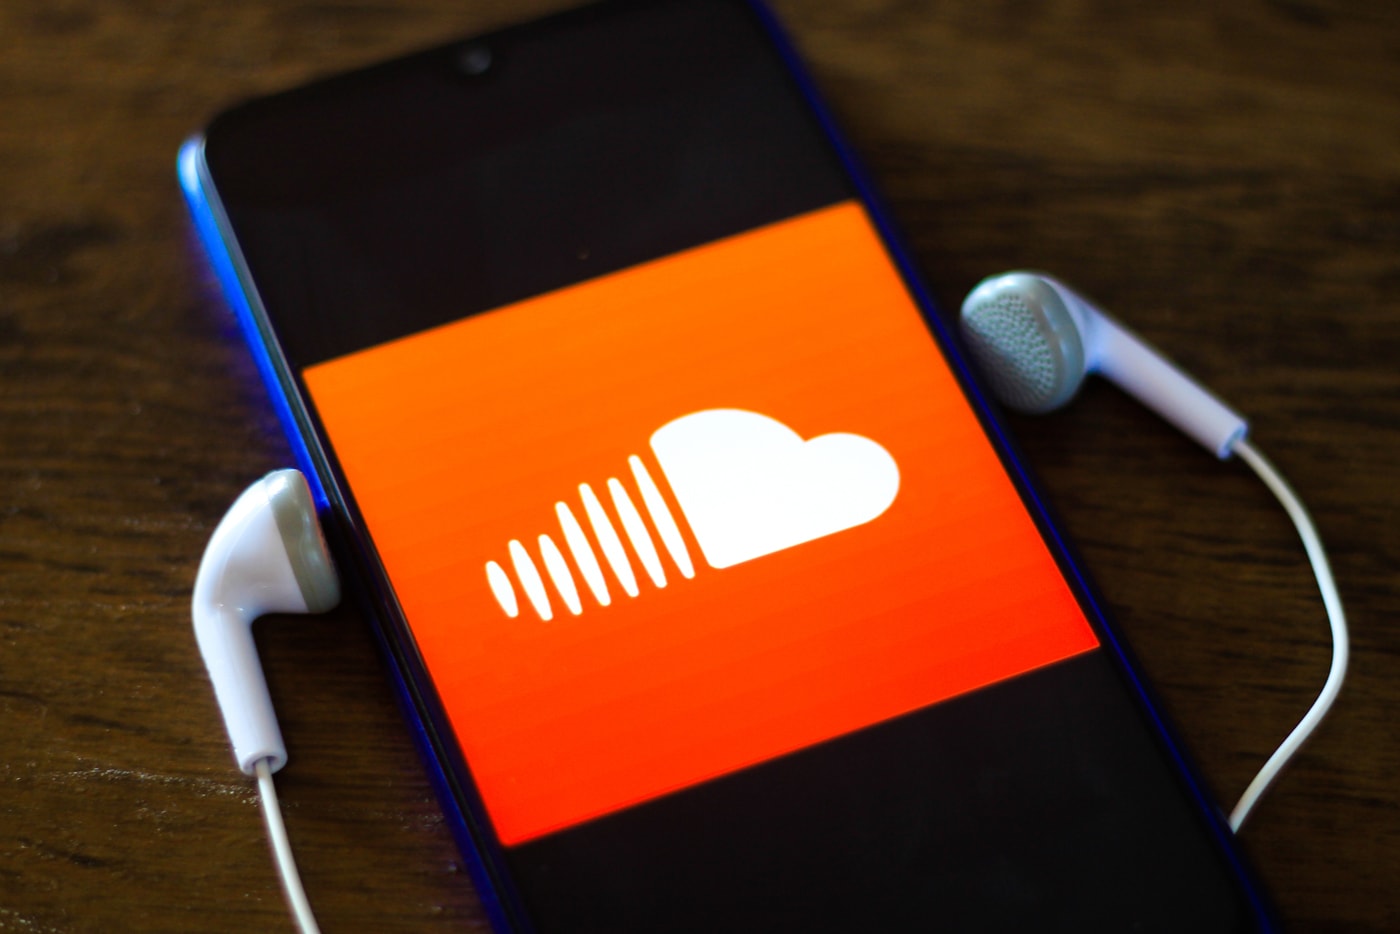 soundcloud-is-reportedly-considering-a-1billion-usd-sale